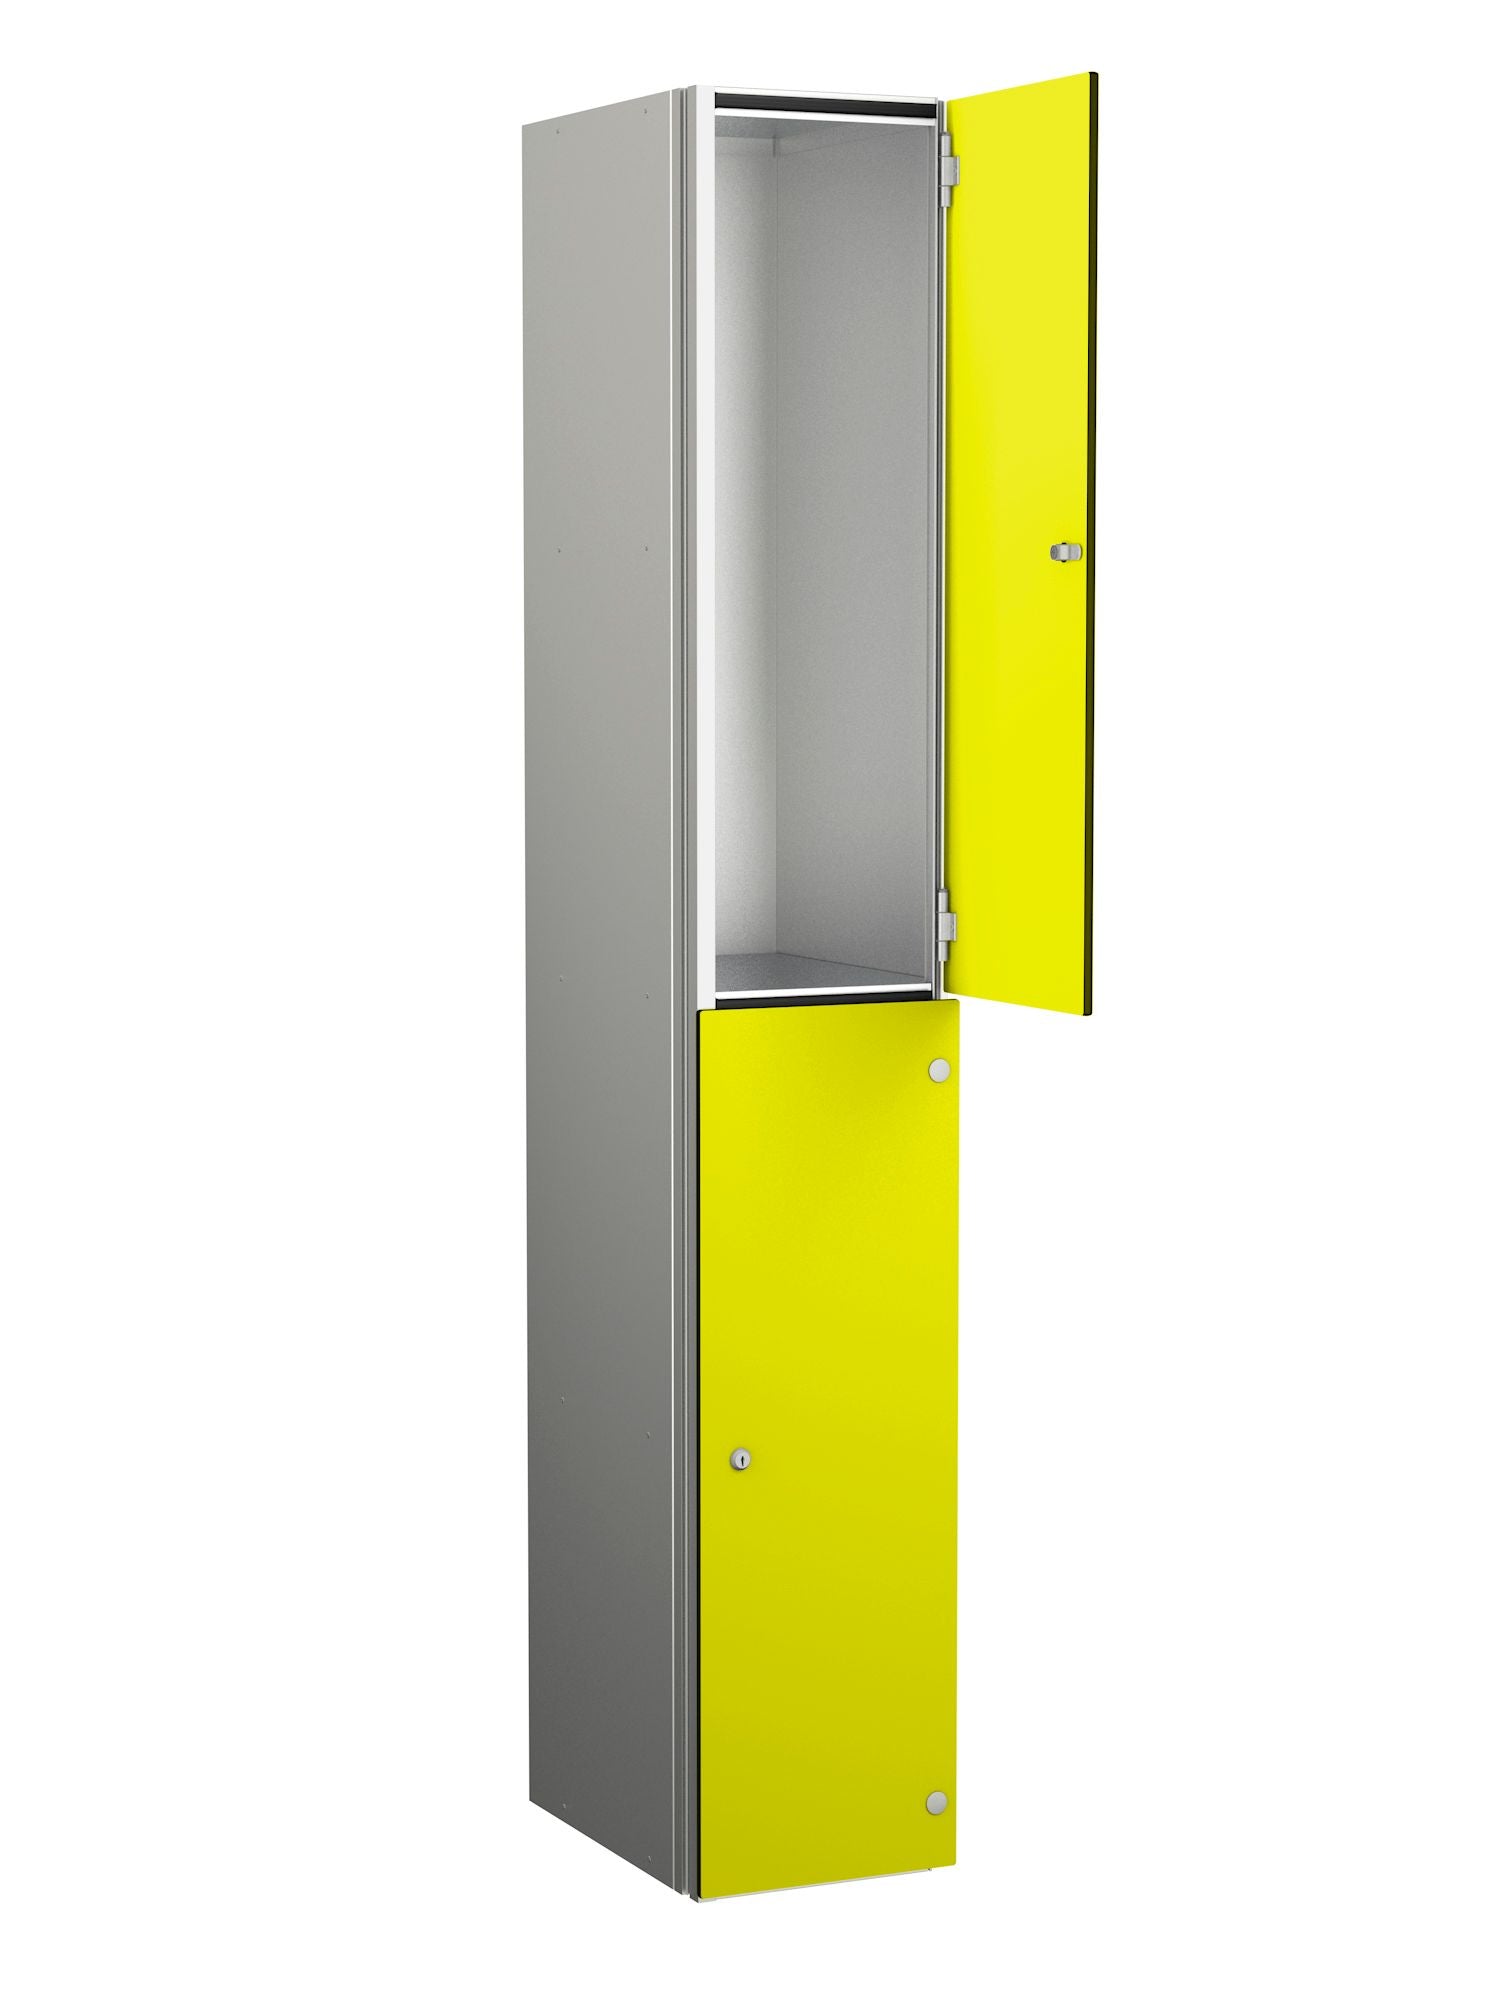 ZENBOX WET AREA LOCKERS WITH SGL DOORS - LIME YELLOW 2 DOOR Storage Lockers > Lockers > Cabinets > Storage > Probe > One Stop For Safety   